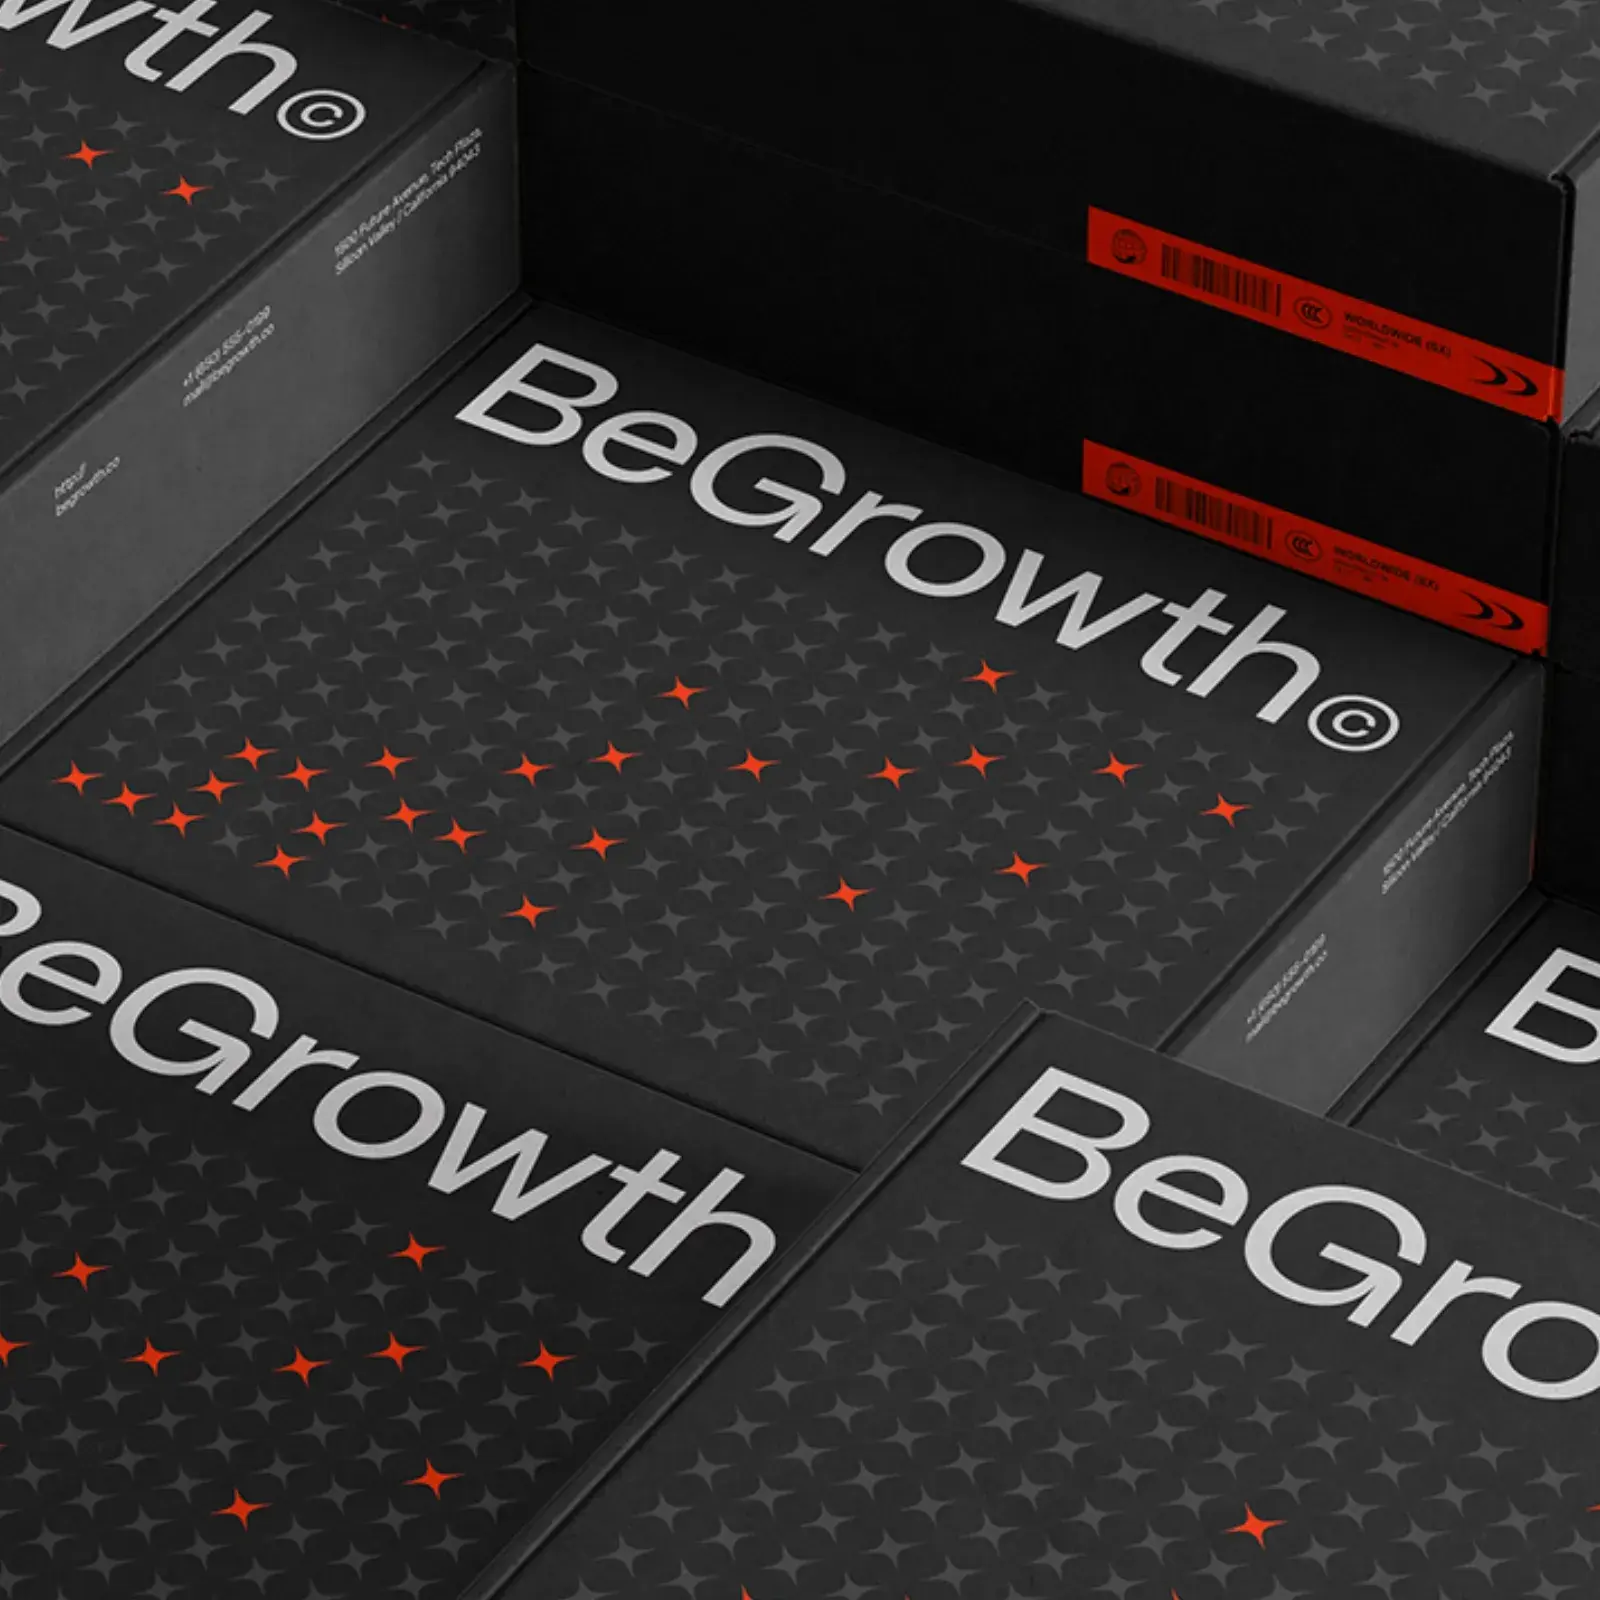 Branding: A Deep Dive into BeGrowth's Visual Identity